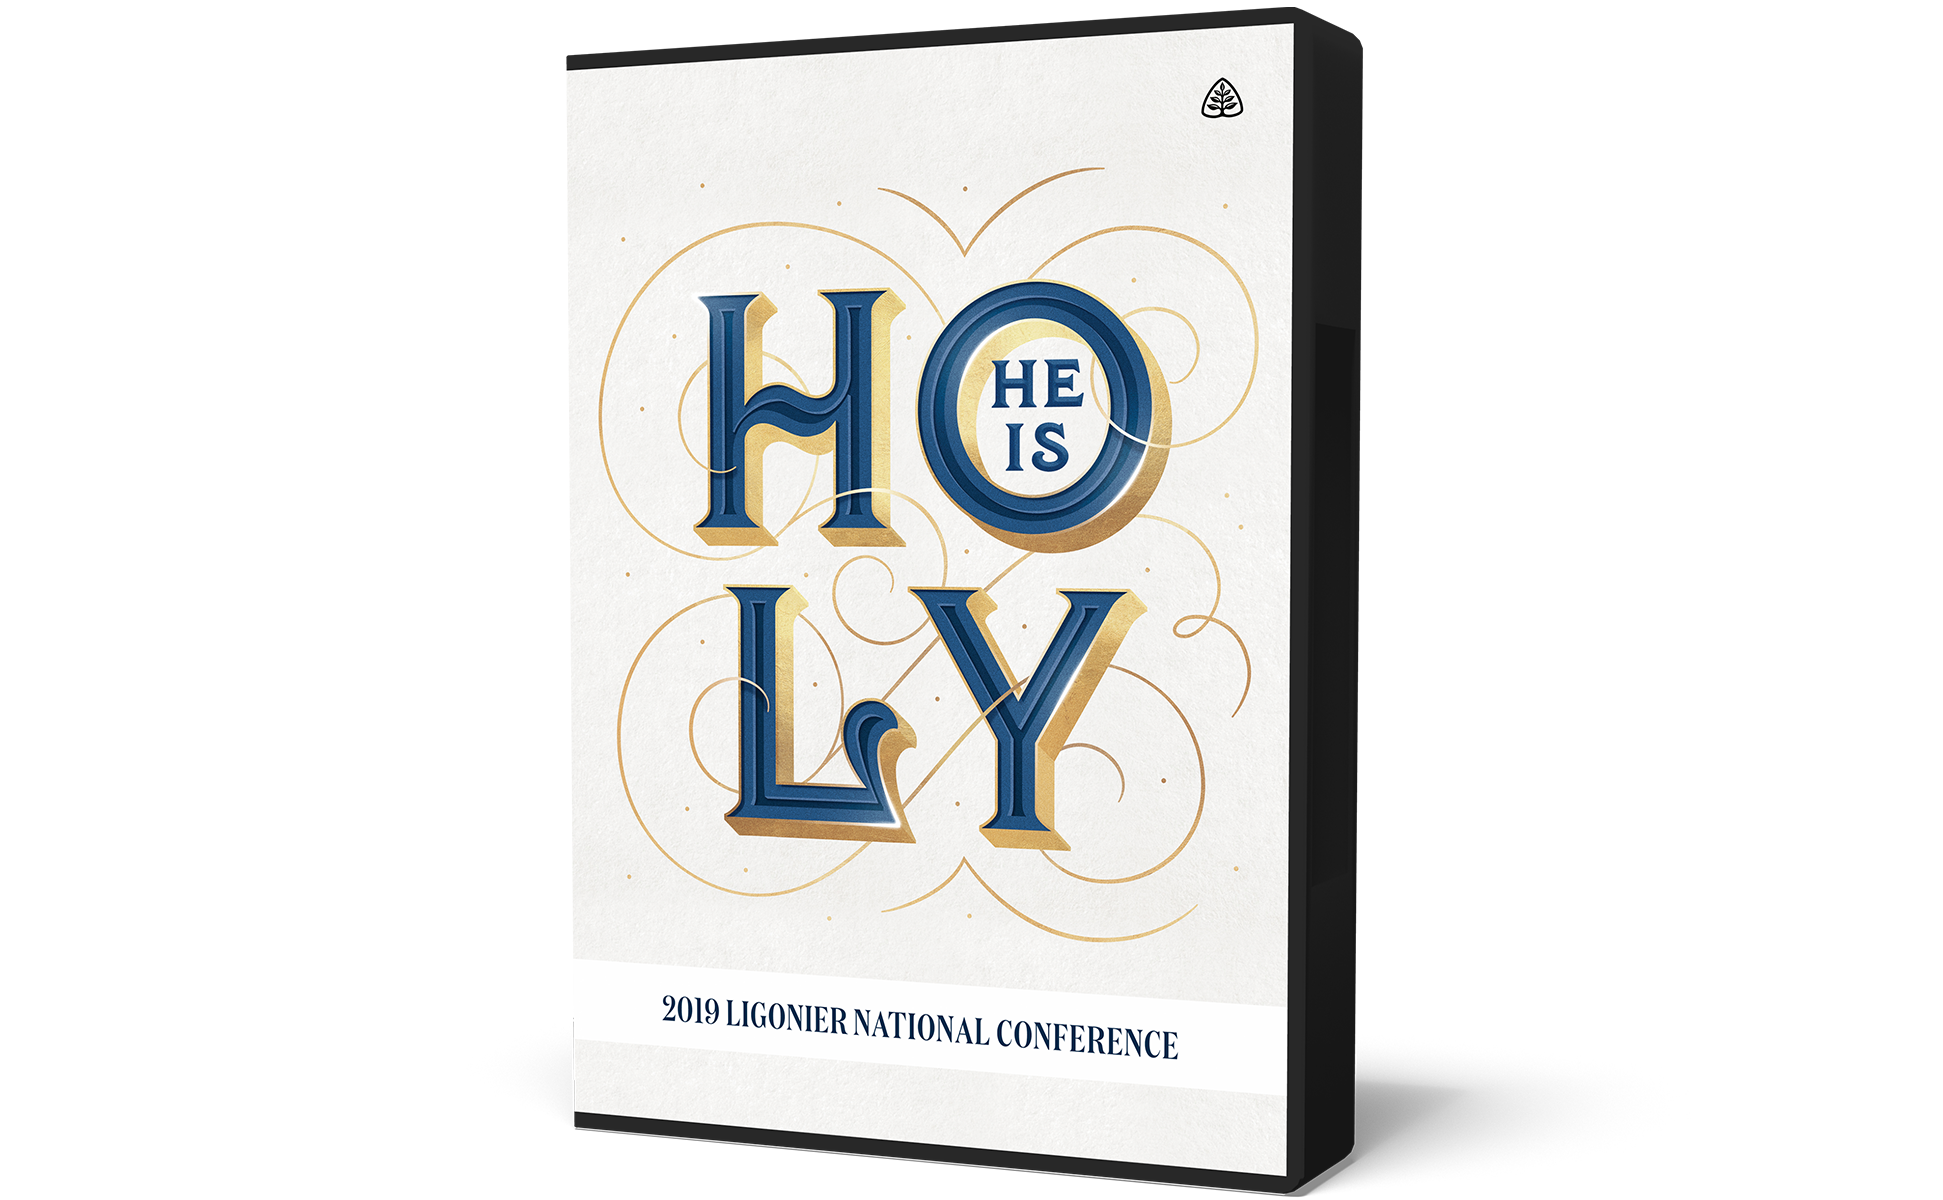 He Is Holy: 2019 National Conference